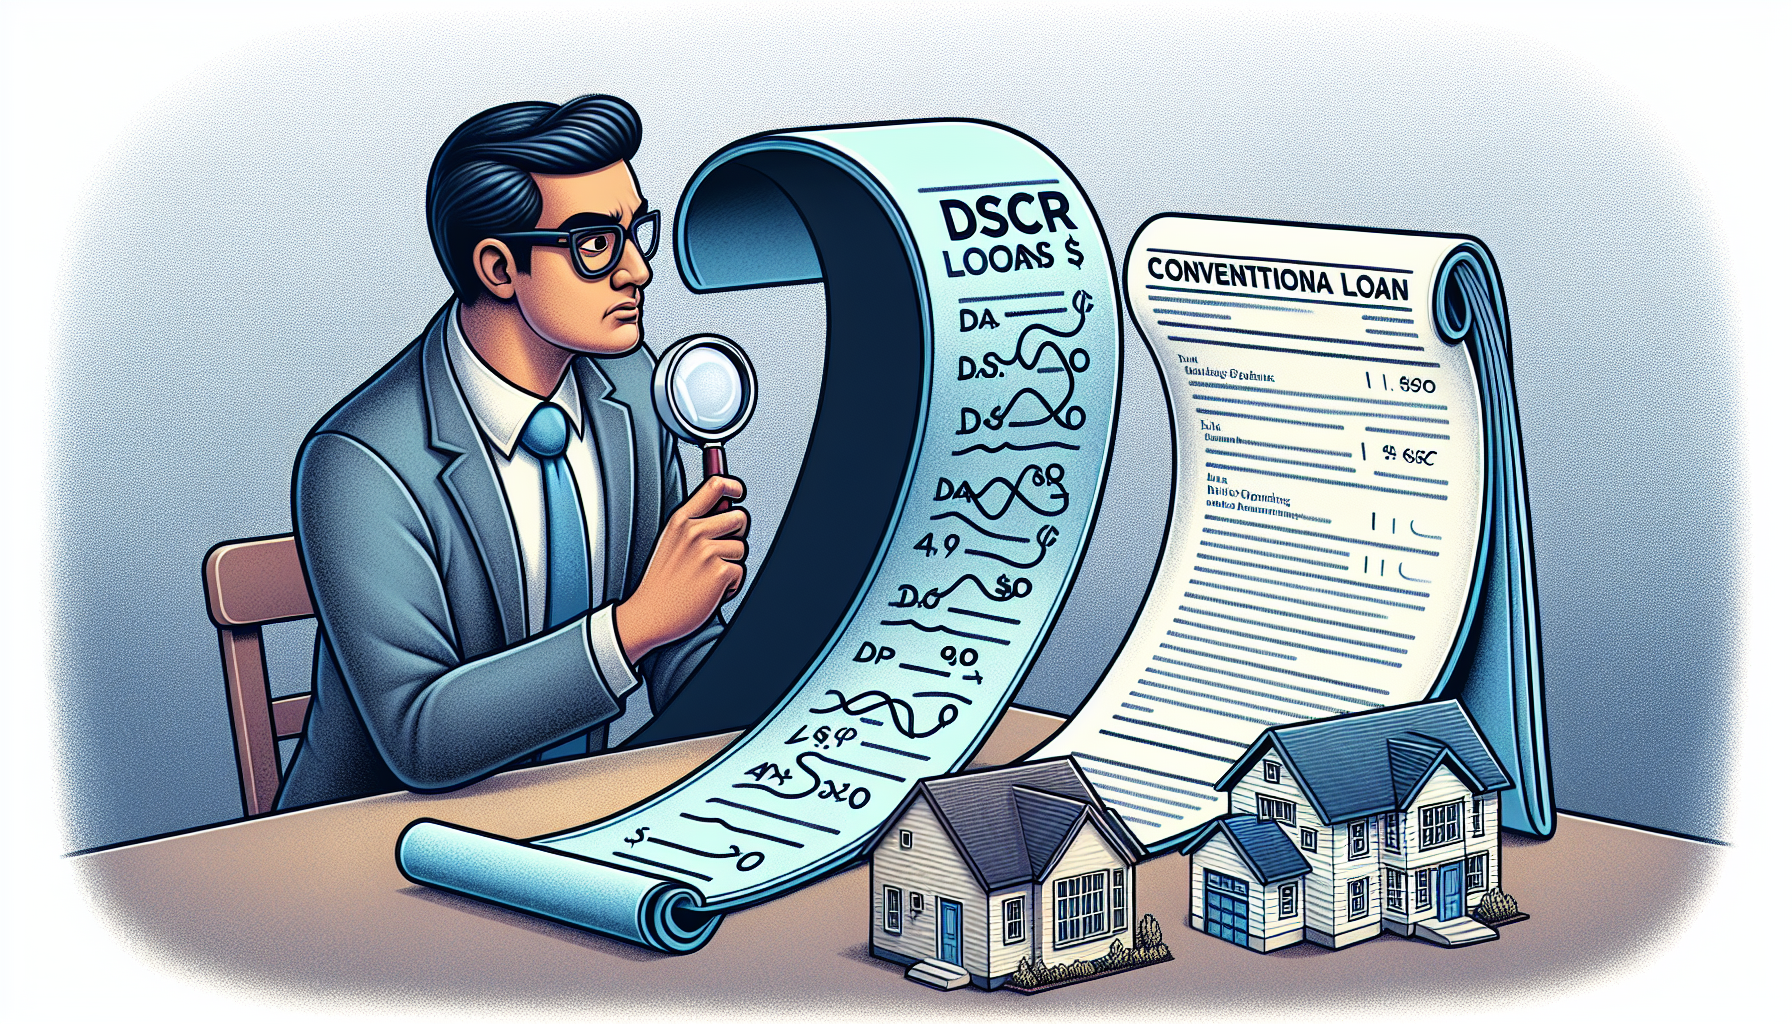 Illustration of real estate investor comparing DSCR loans with conventional loans